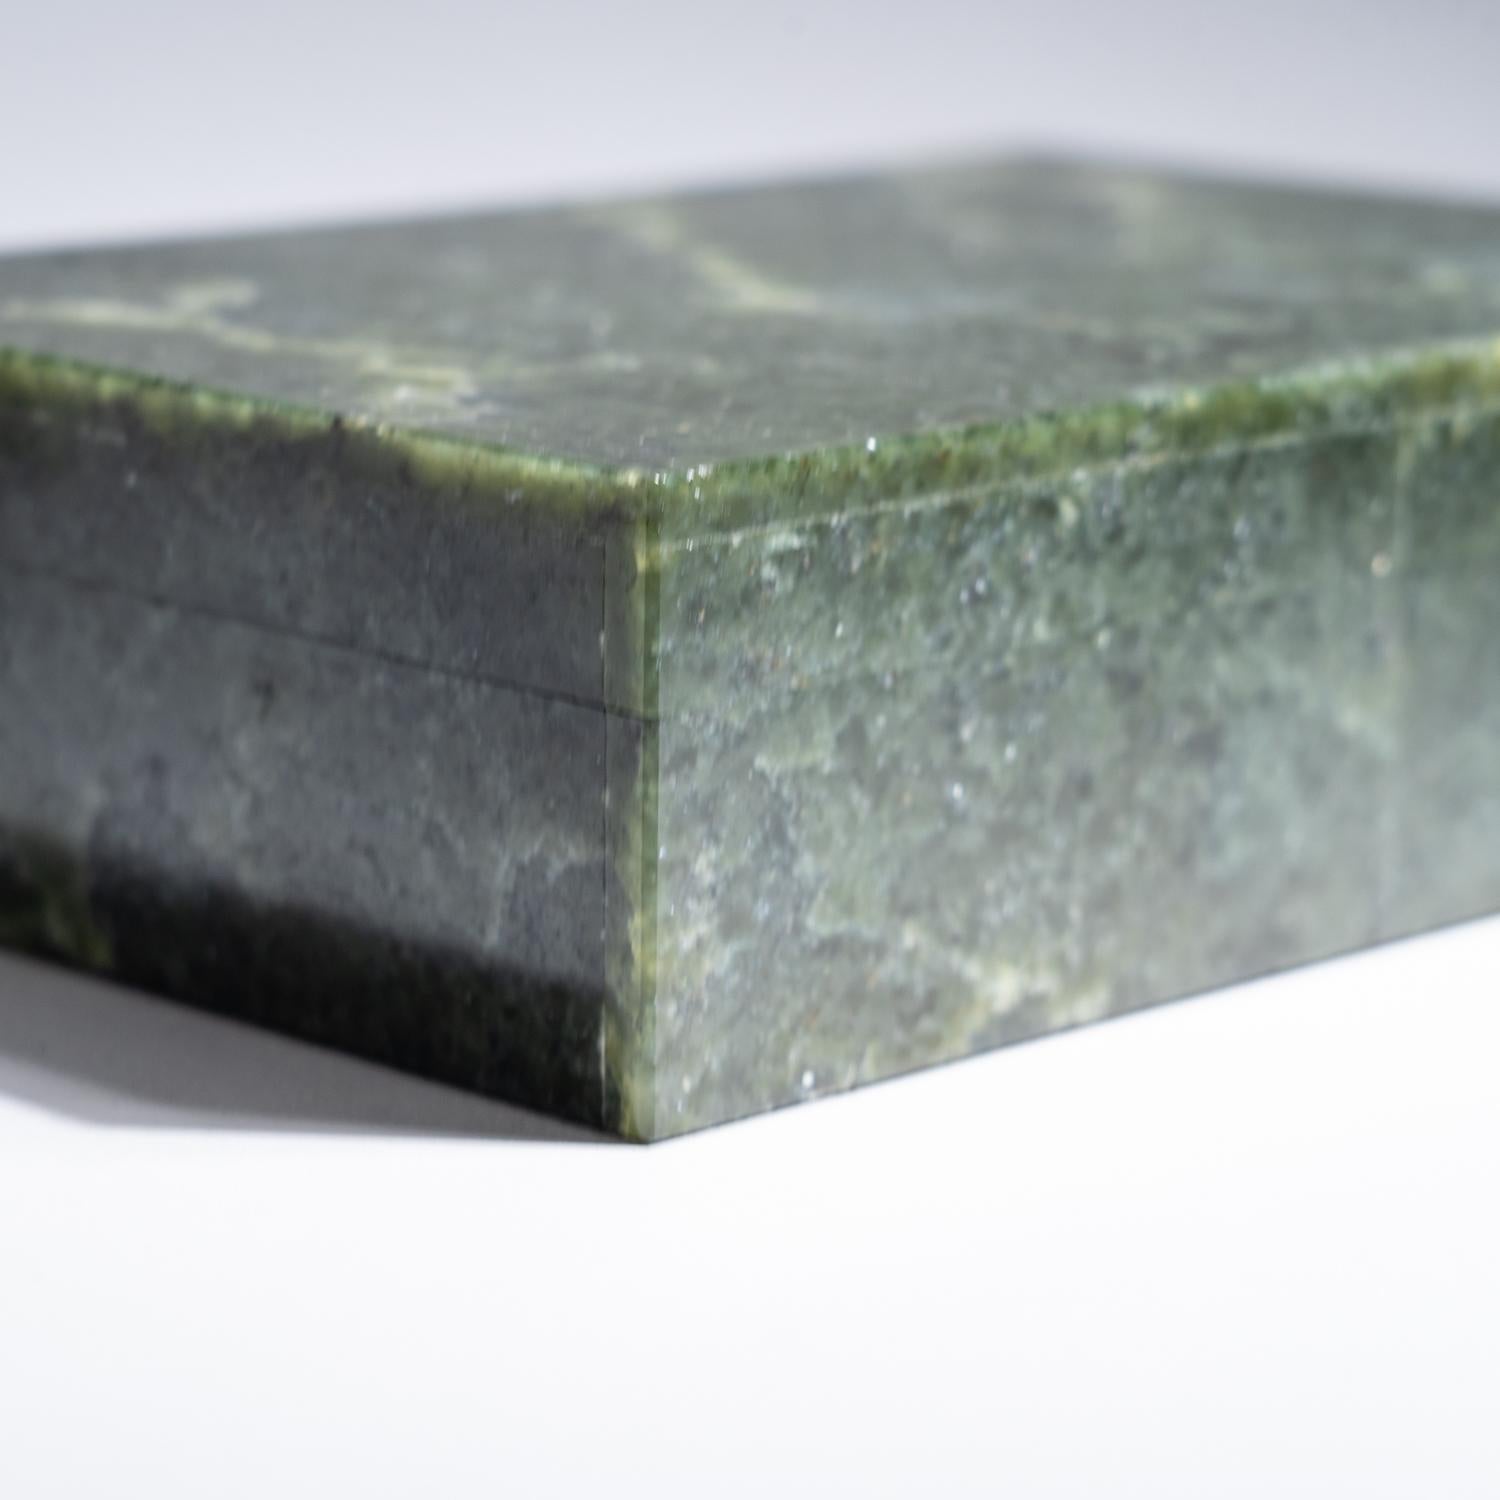 Large rectangle jewelry box handmade from the finest top grade natural jade, with rich golden color and stunning chatoyancy banding. The box has been hand polished to a mirror finish. The lid has a piano hinge opening to reveal a black velvet lined